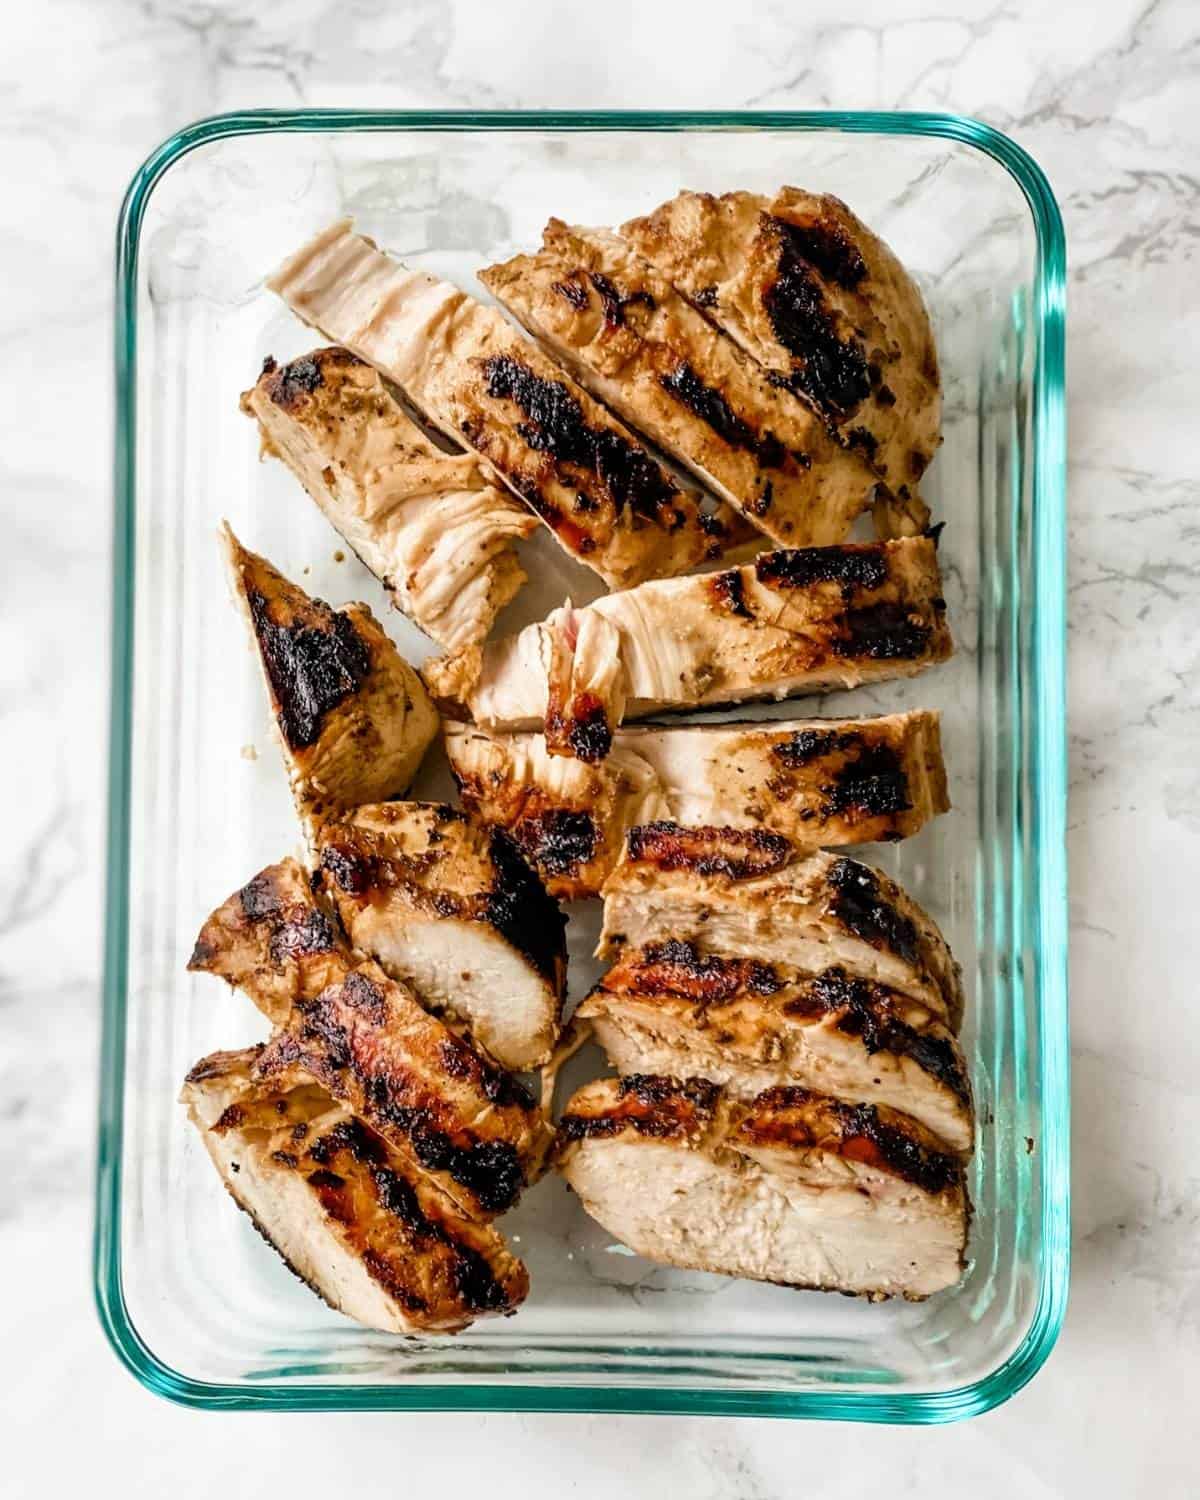 cooked grilled chicken in a glass container